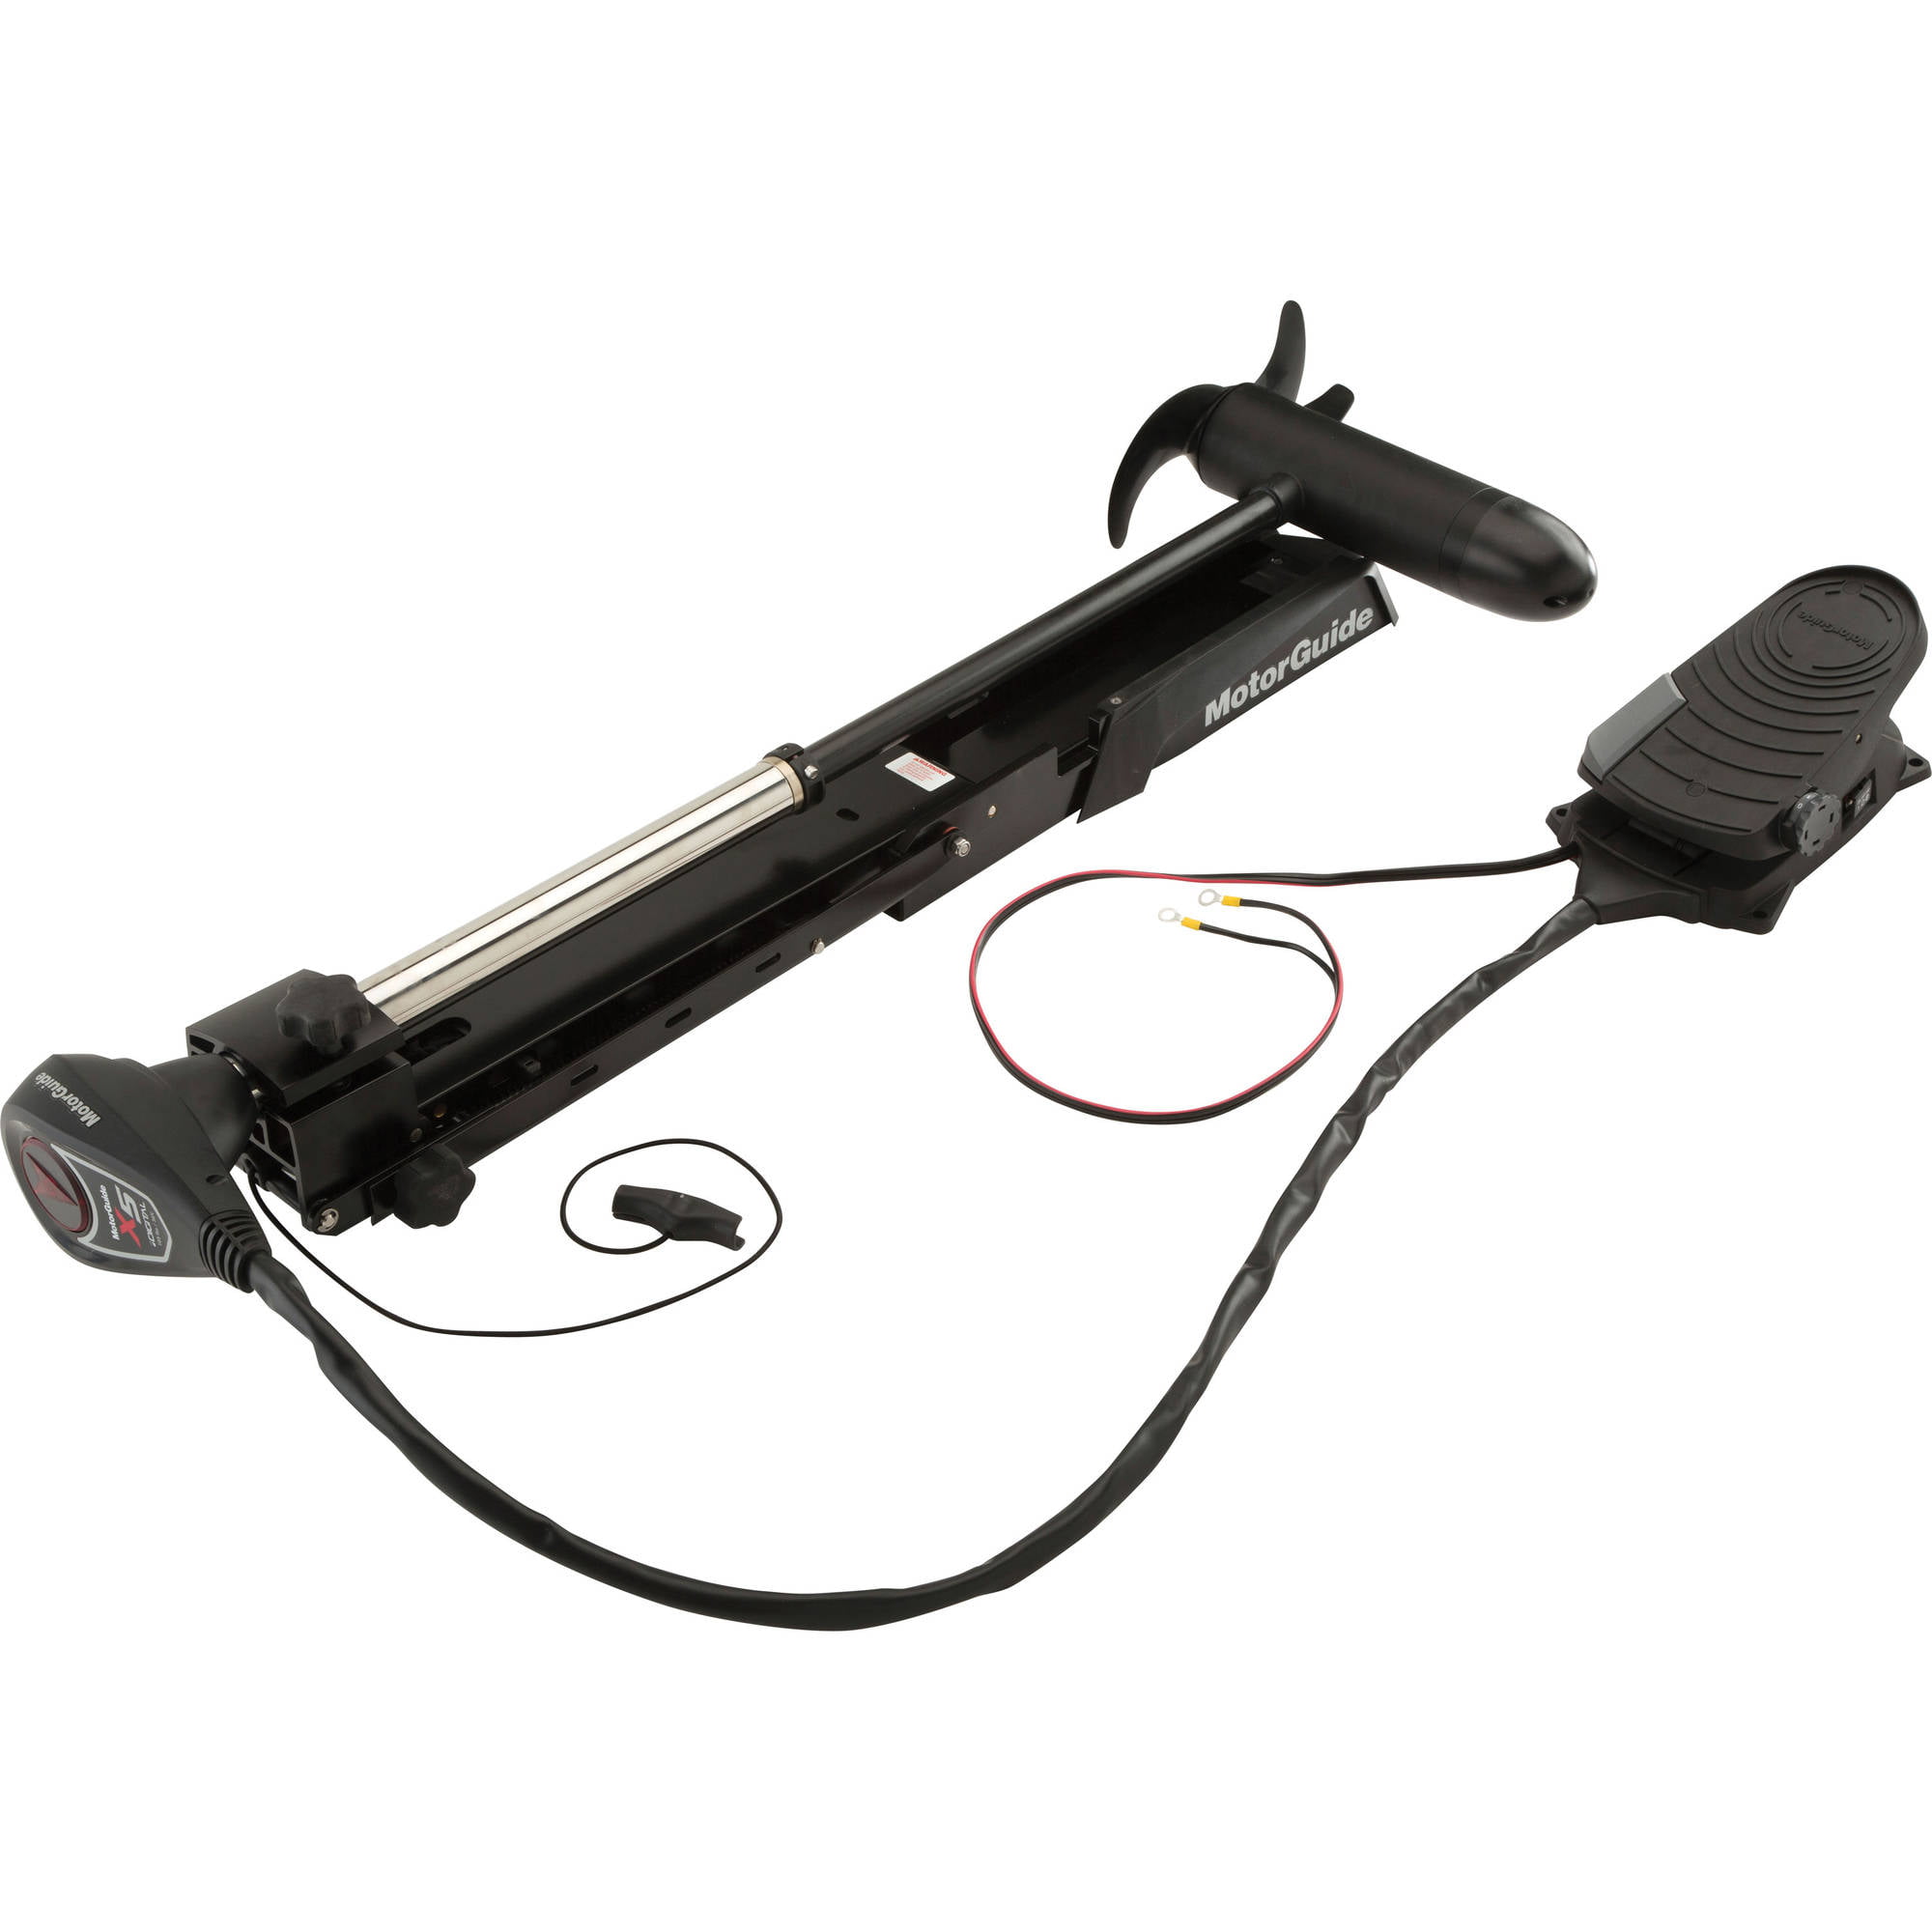 MotorGuide 940500130 X5 105FW Bow Mount Sonar Trolling Motor with 